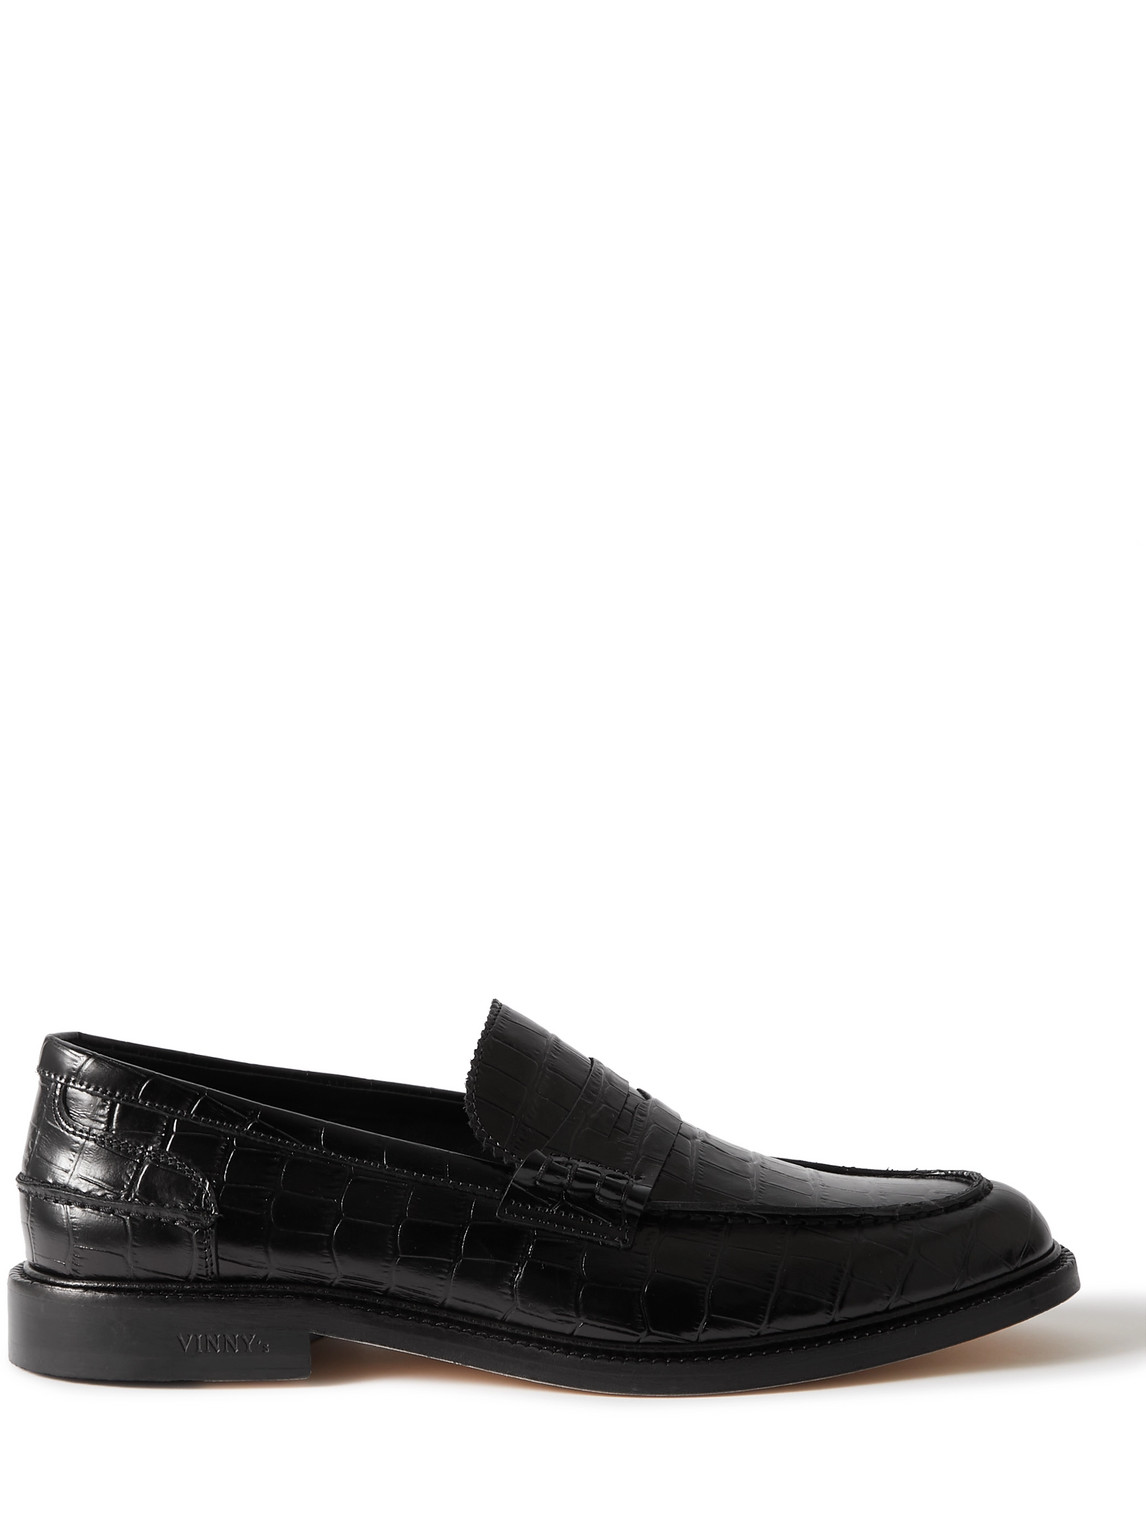 Vinny's Romeo Croc-effect Leather Penny Loafers In Black